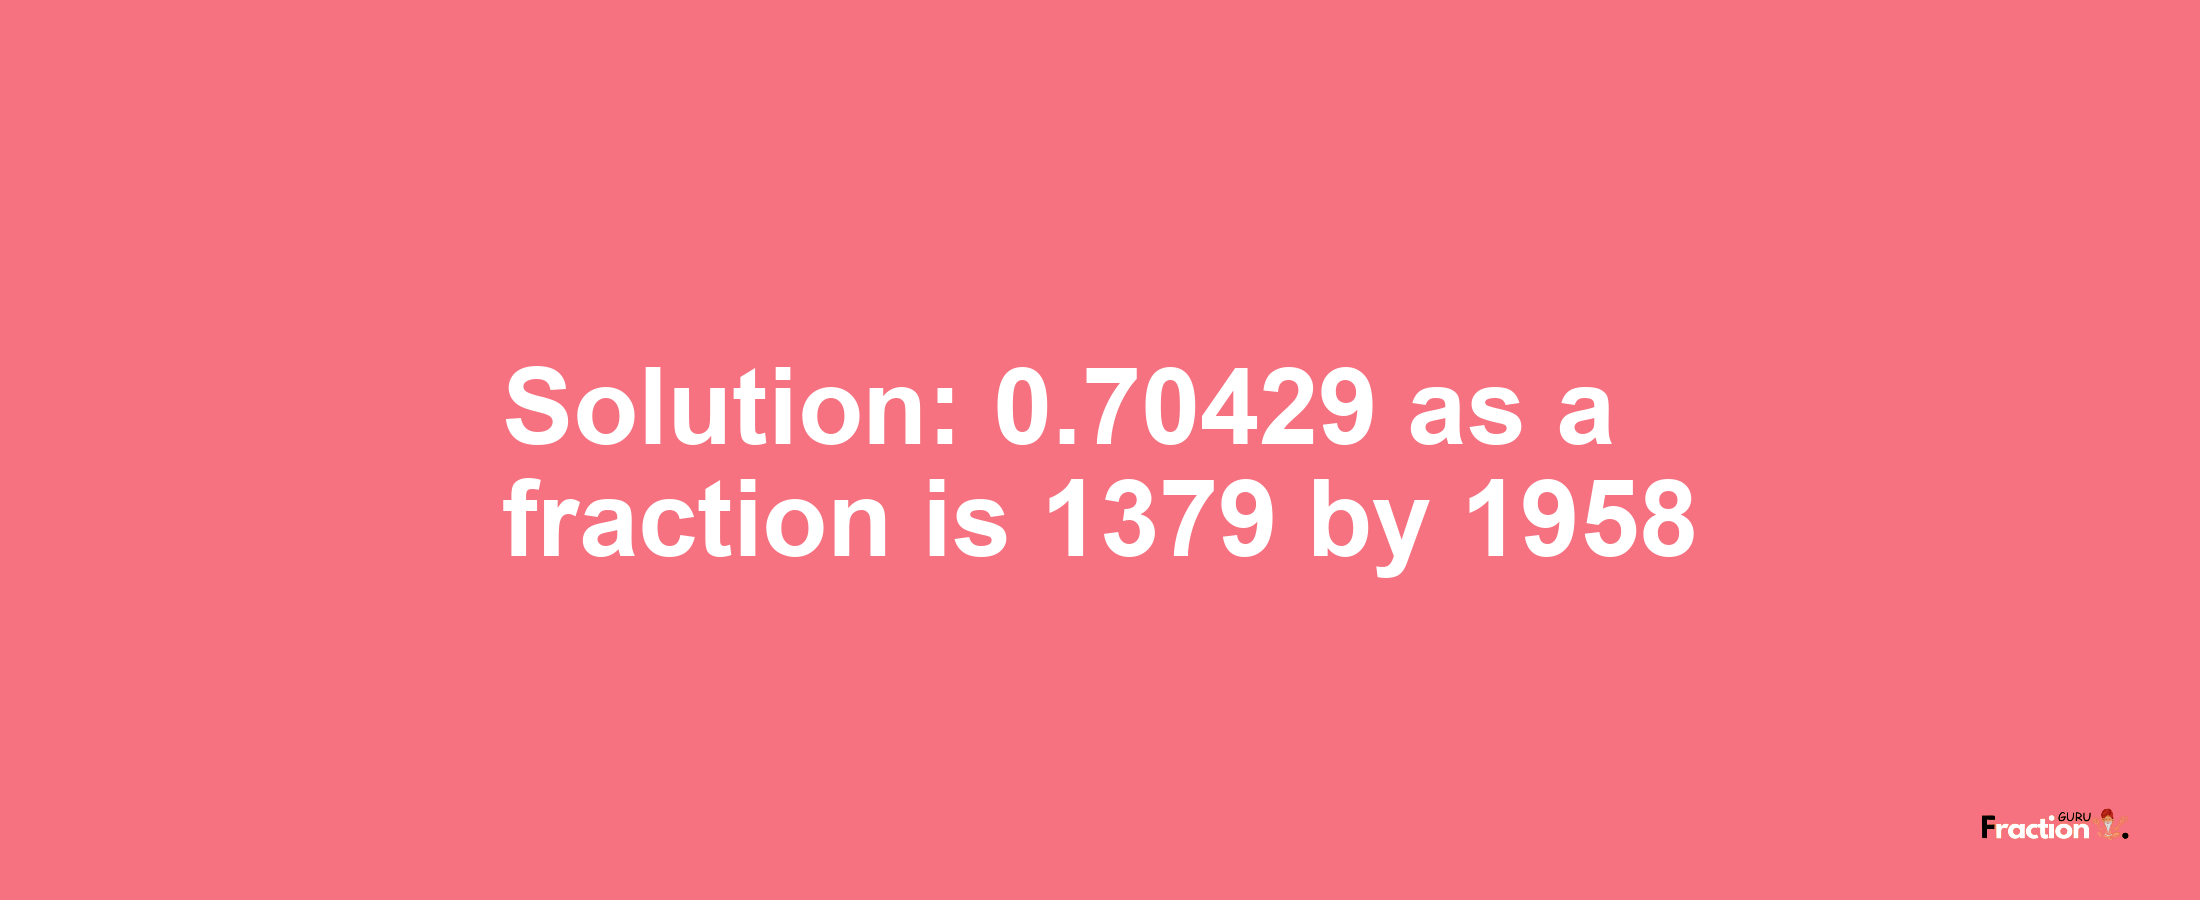 Solution:0.70429 as a fraction is 1379/1958